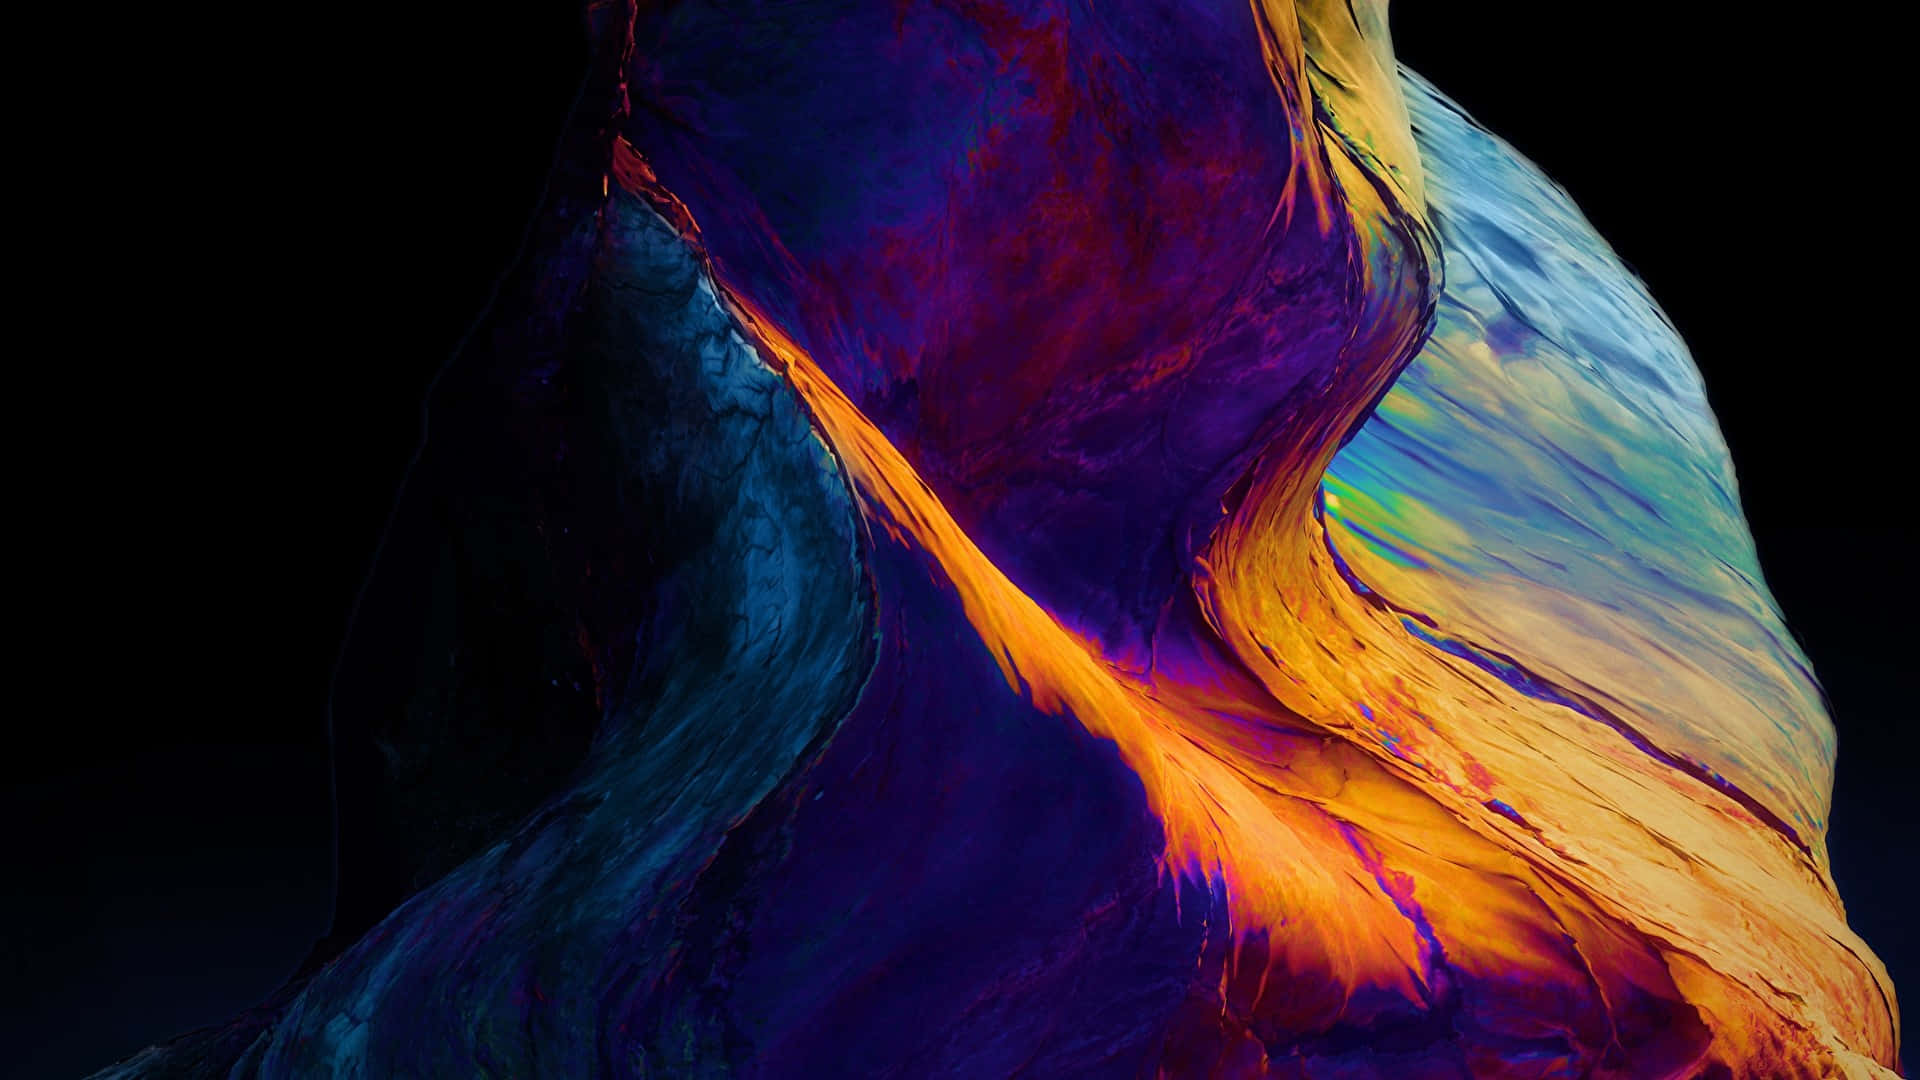 Bring the vibrancy of colors to your home with this beautiful 1080p Amoled background